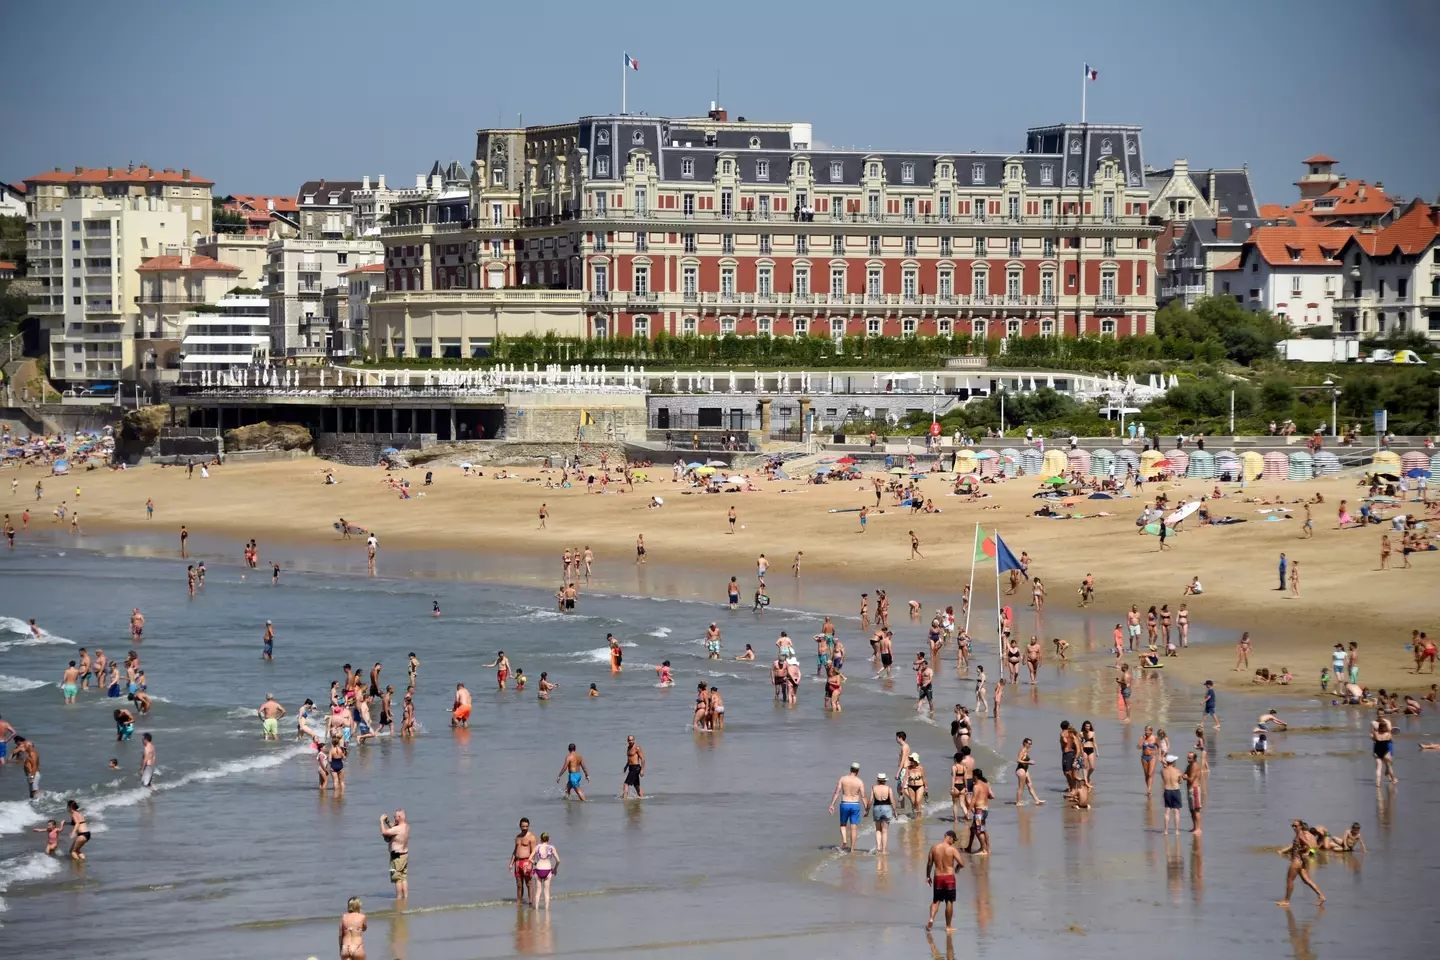 The alleged hazing incident is reported as taking place at The Hotel du Palais in Biarritz.